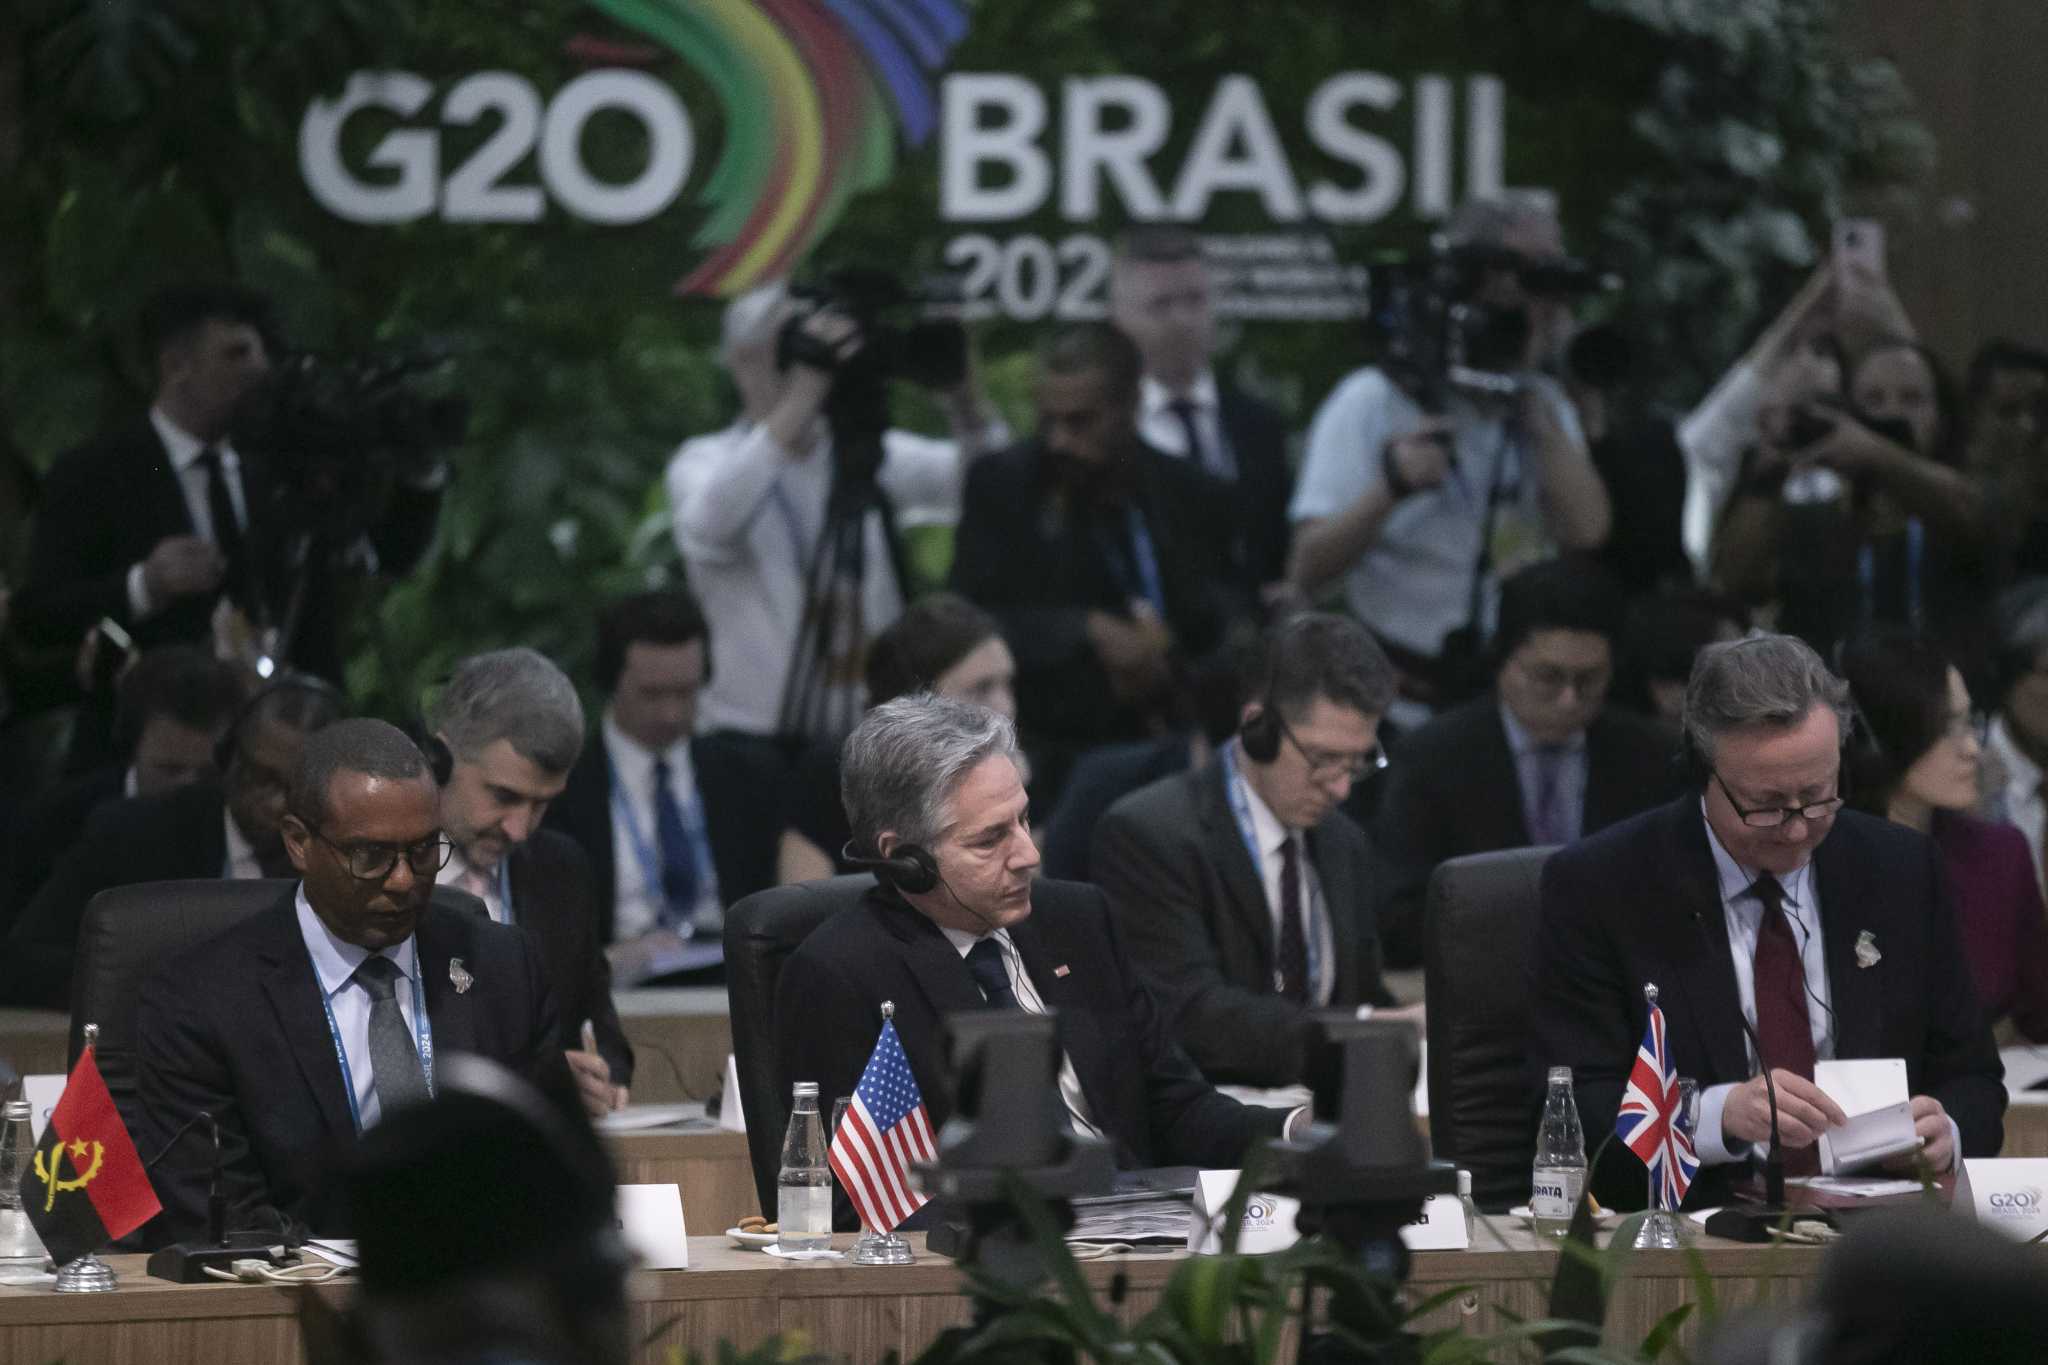 Brazil calls for reform of United Nations as it starts its G20 presidency